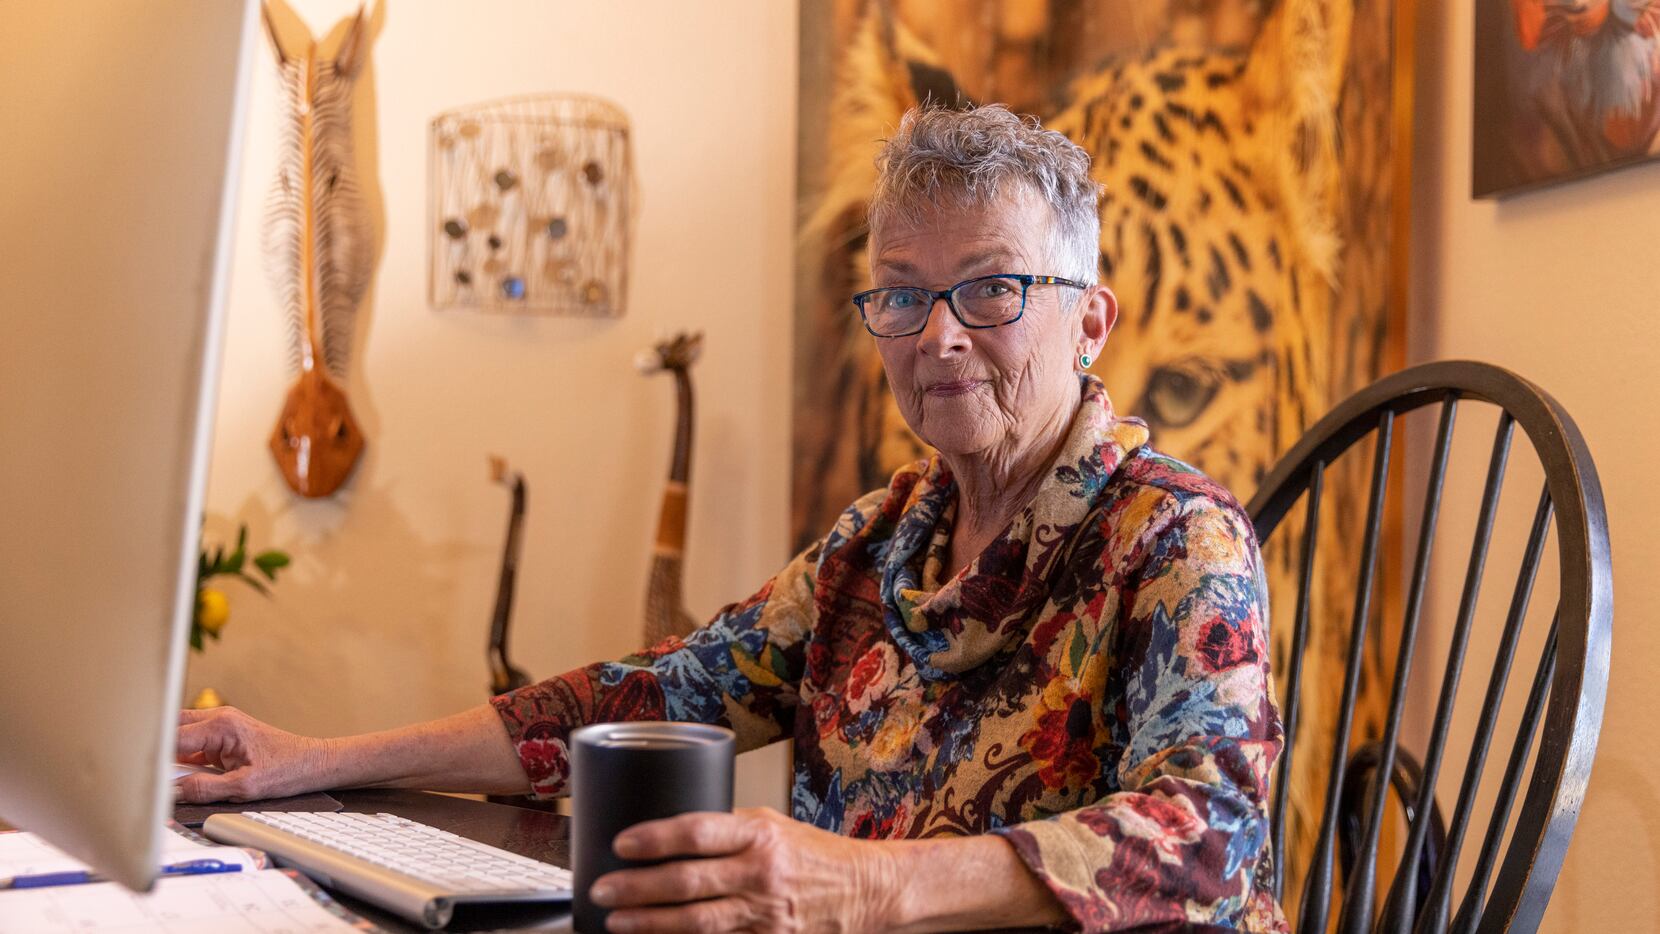 Barbara Holton, 69, pictured inside her home on Wednesday, Jan. 26, 2022 in Sachse, Texas....